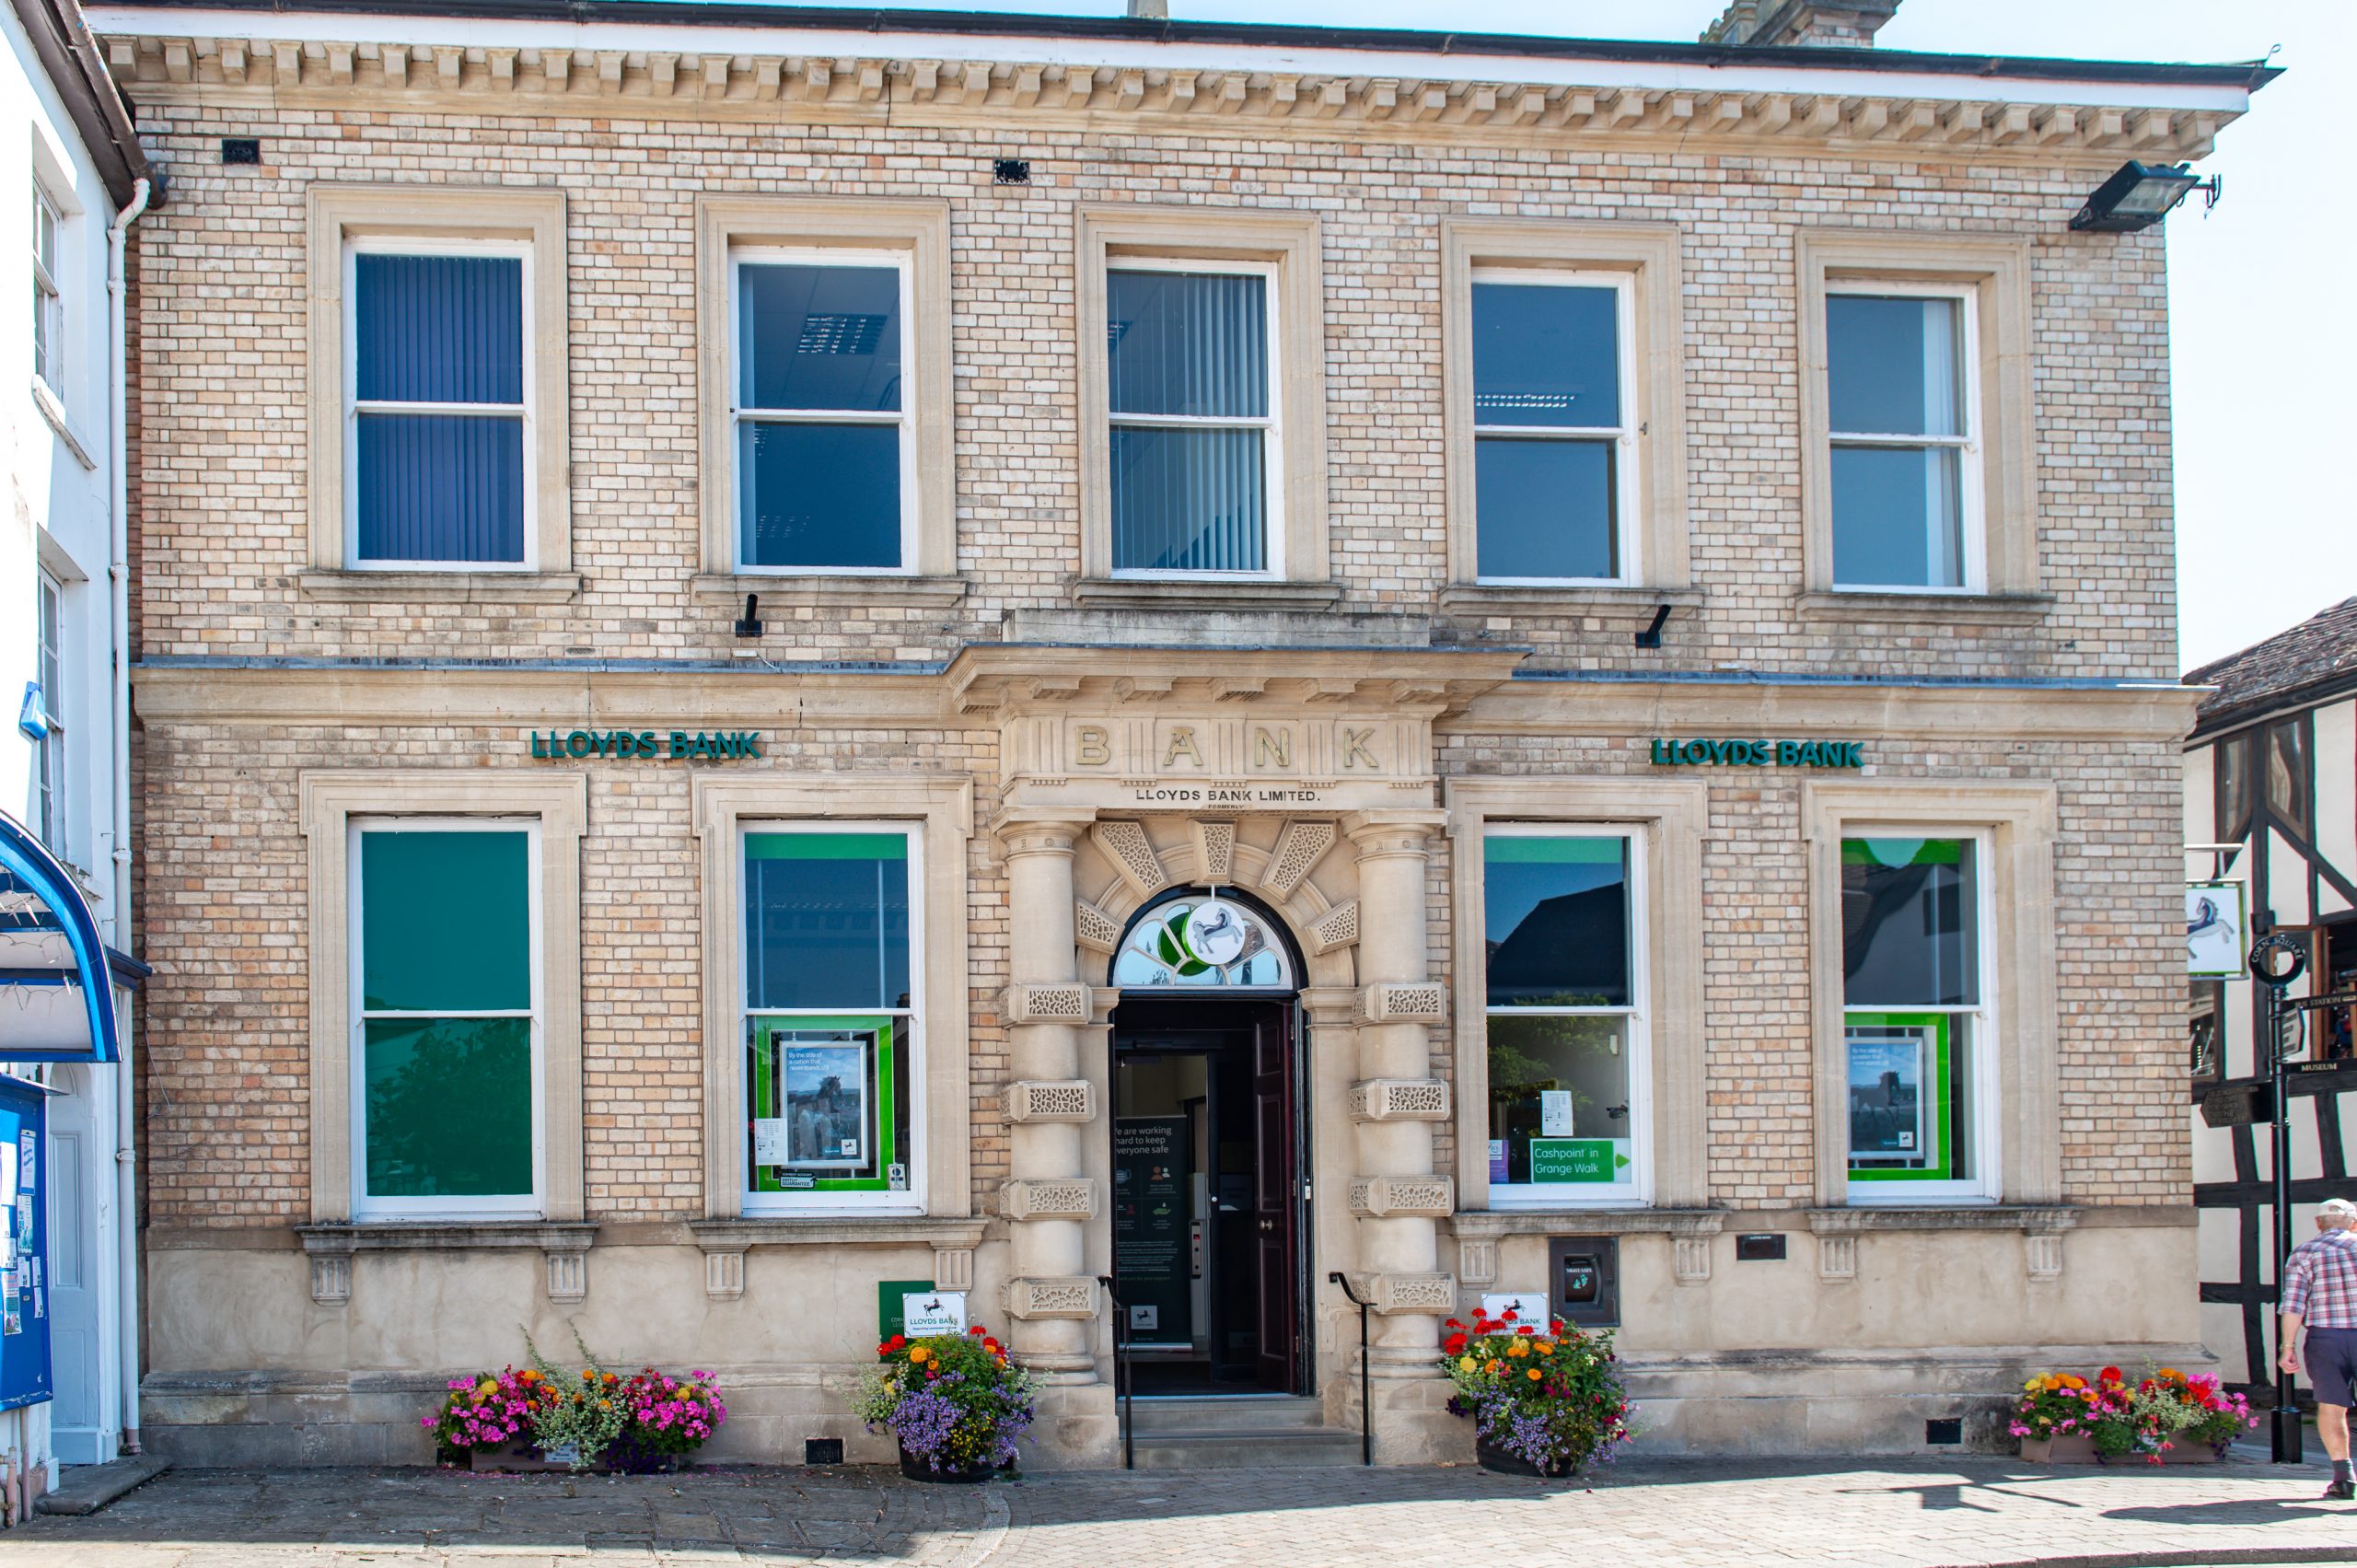 NEWS | Herefordshire branches not expected to be affected by further closures announced by Lloyds Banking Group